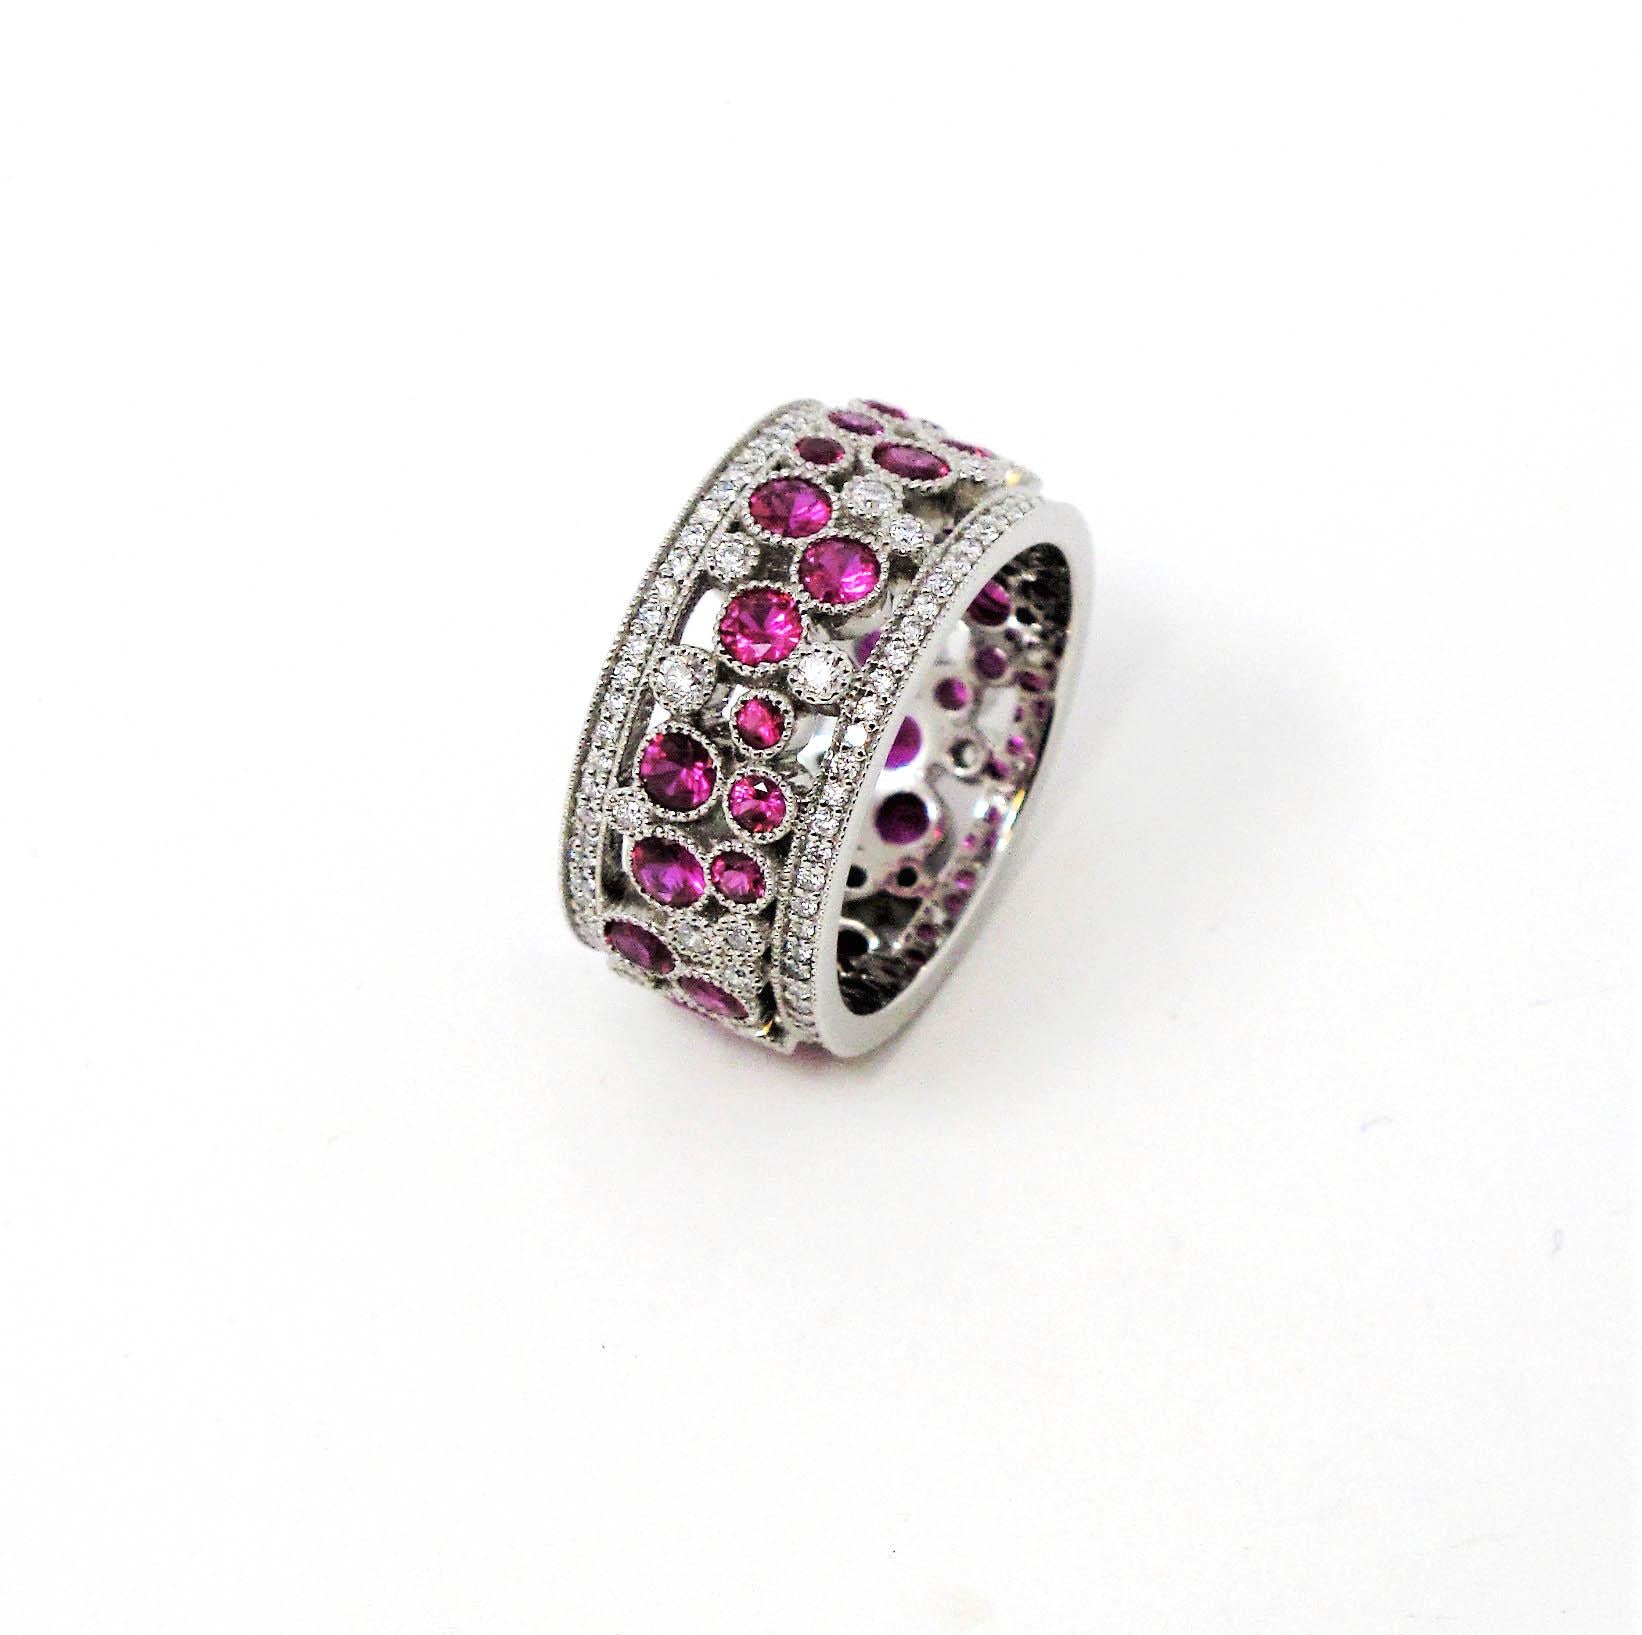 Size 6.5

Stunningly sparkly Cobblestone band ring from Tiffany & Co. This amazing piece is filled with  dazzling white diamonds and sparkling red rubies set in a playful path of cobblestones throughout the ring. You'll simply adore how these